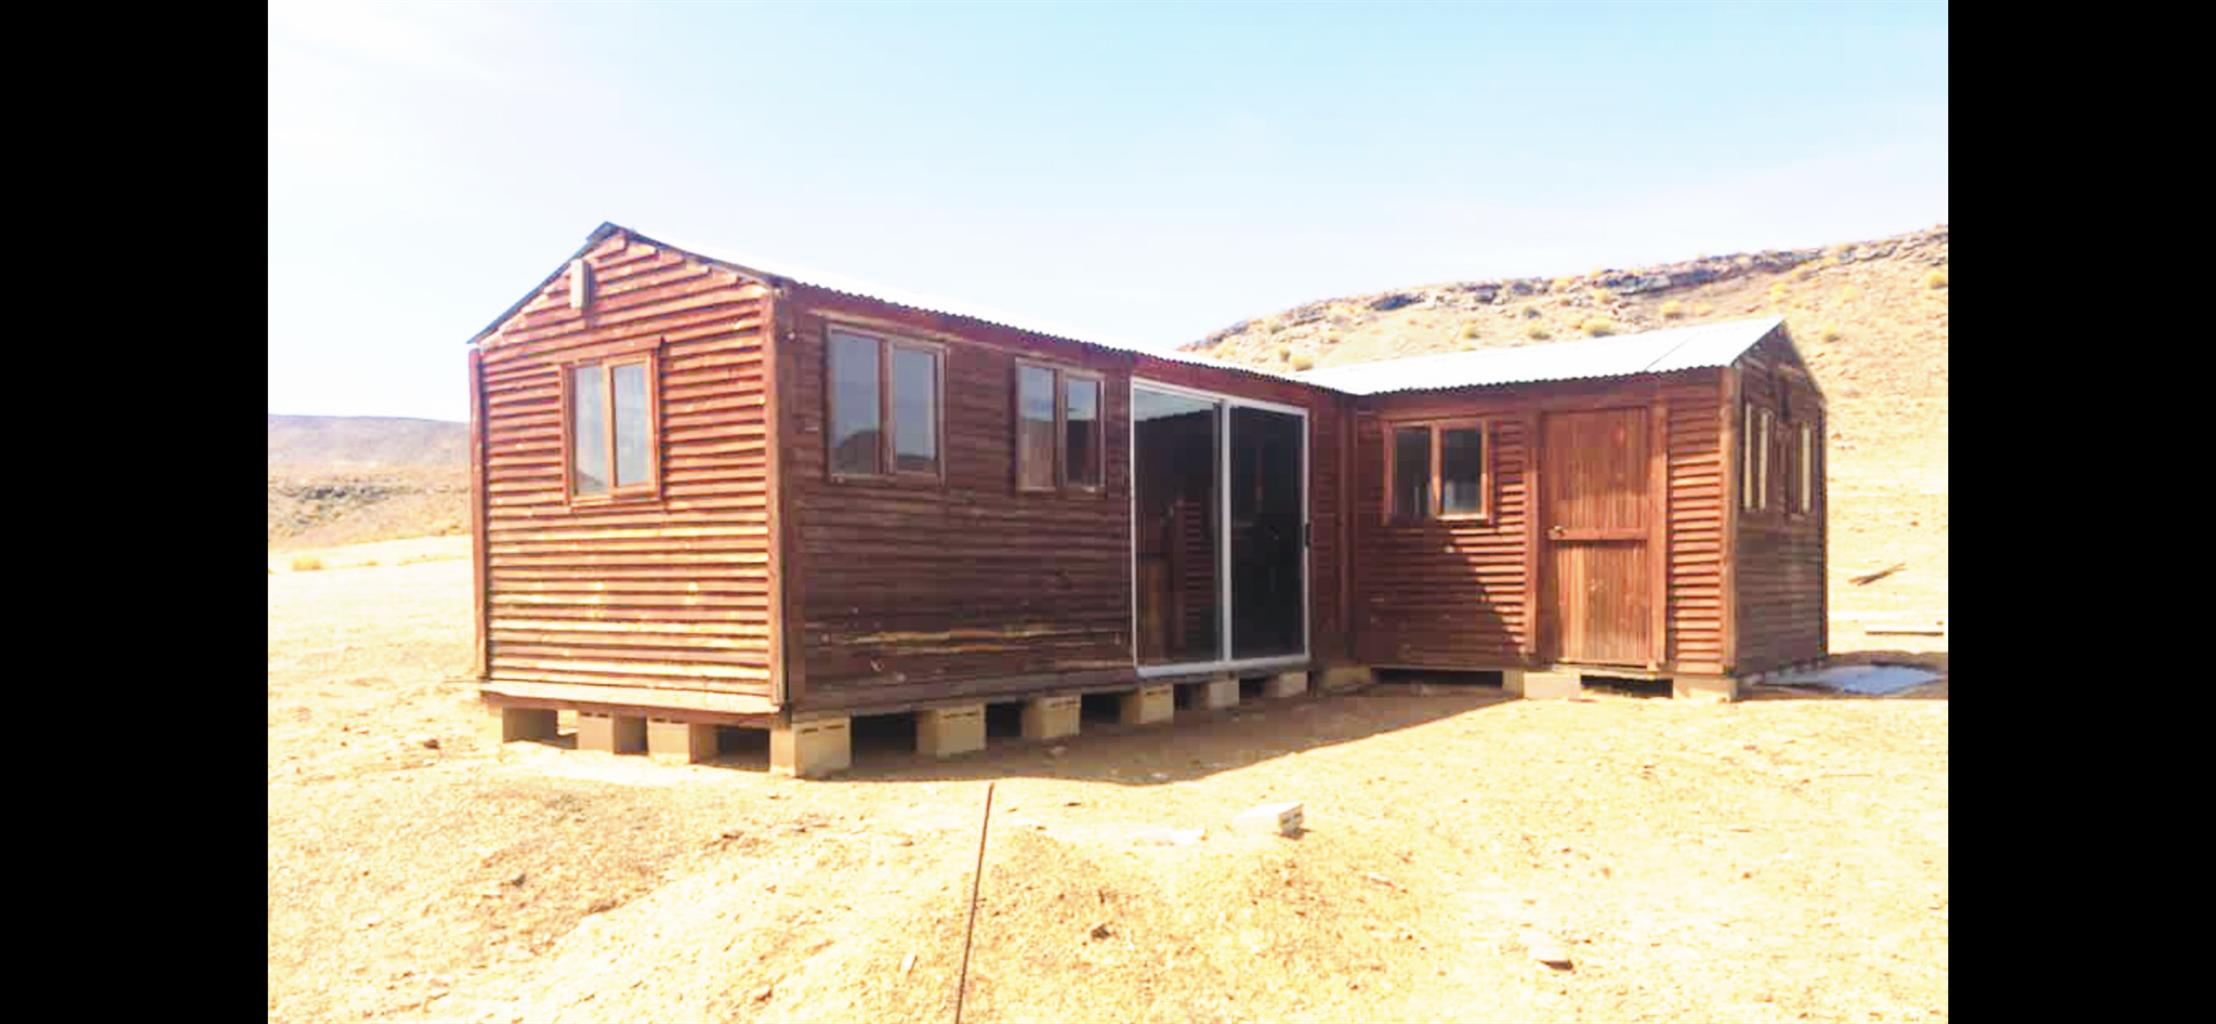 Wendy for sale, to be taken apart and transported off site. Clanwilliam area. 